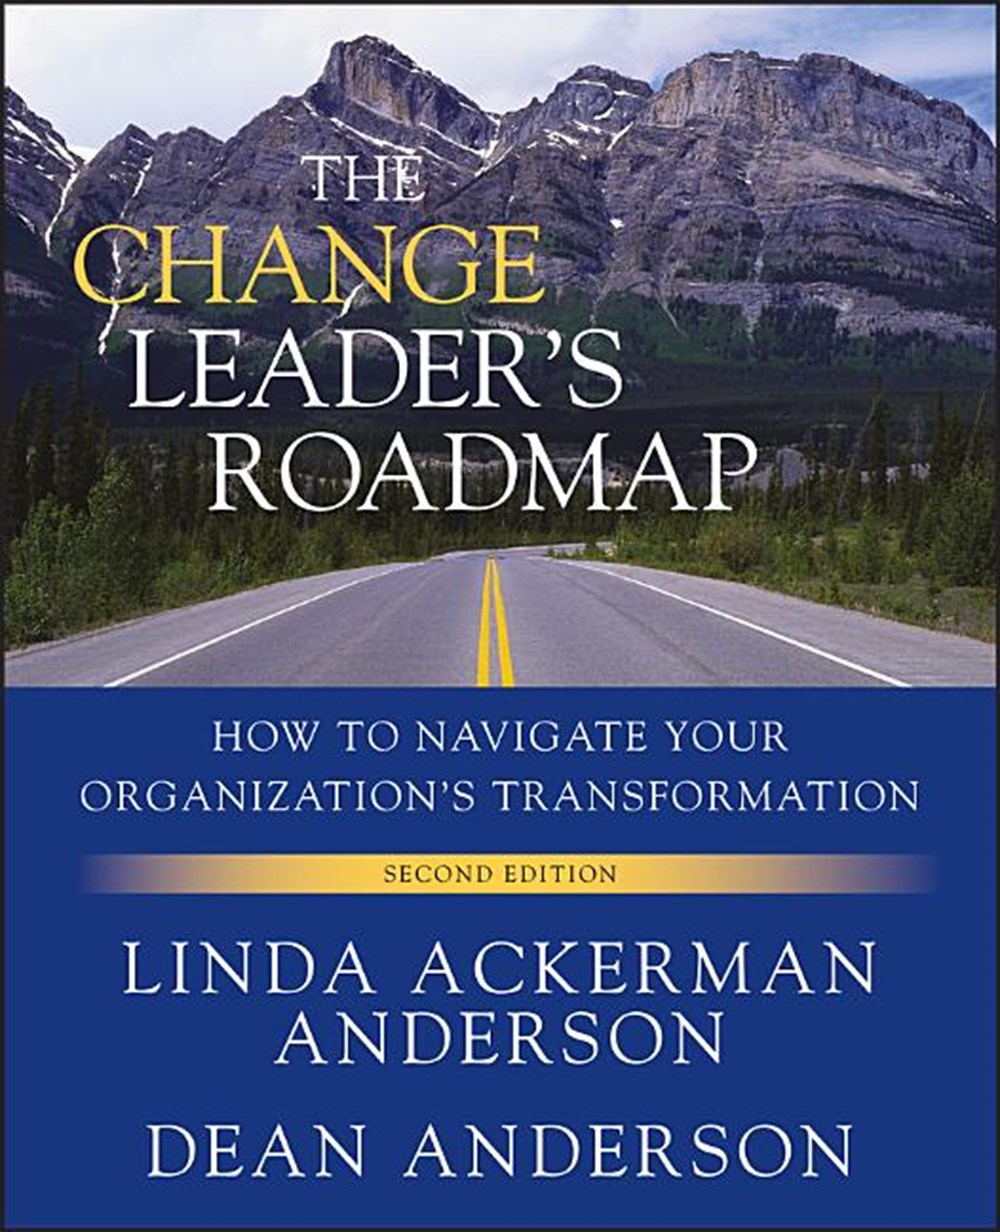 Change Leader's Roadmap: How to Navigate Your Organization's Transformation (Revised)